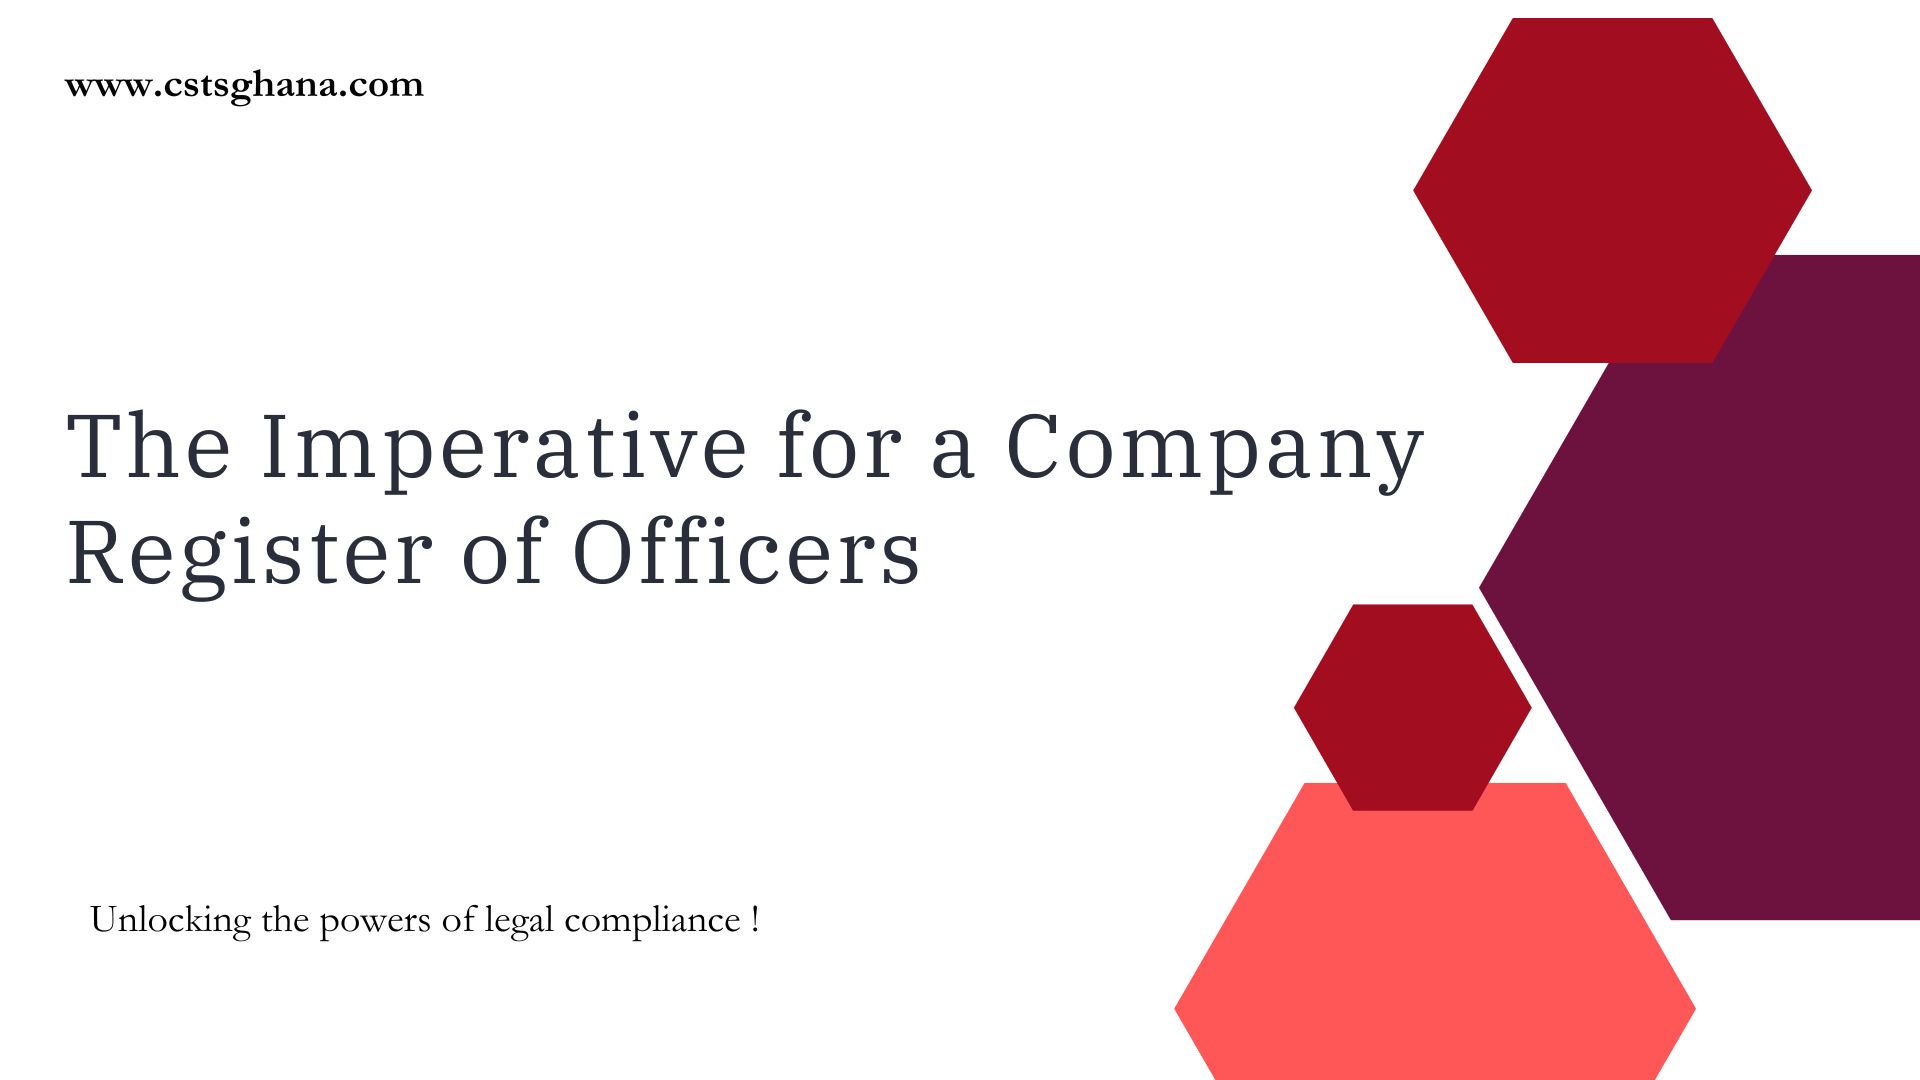 Fostering Transparency and Governance: The Imperative for a Company Register of Officers.